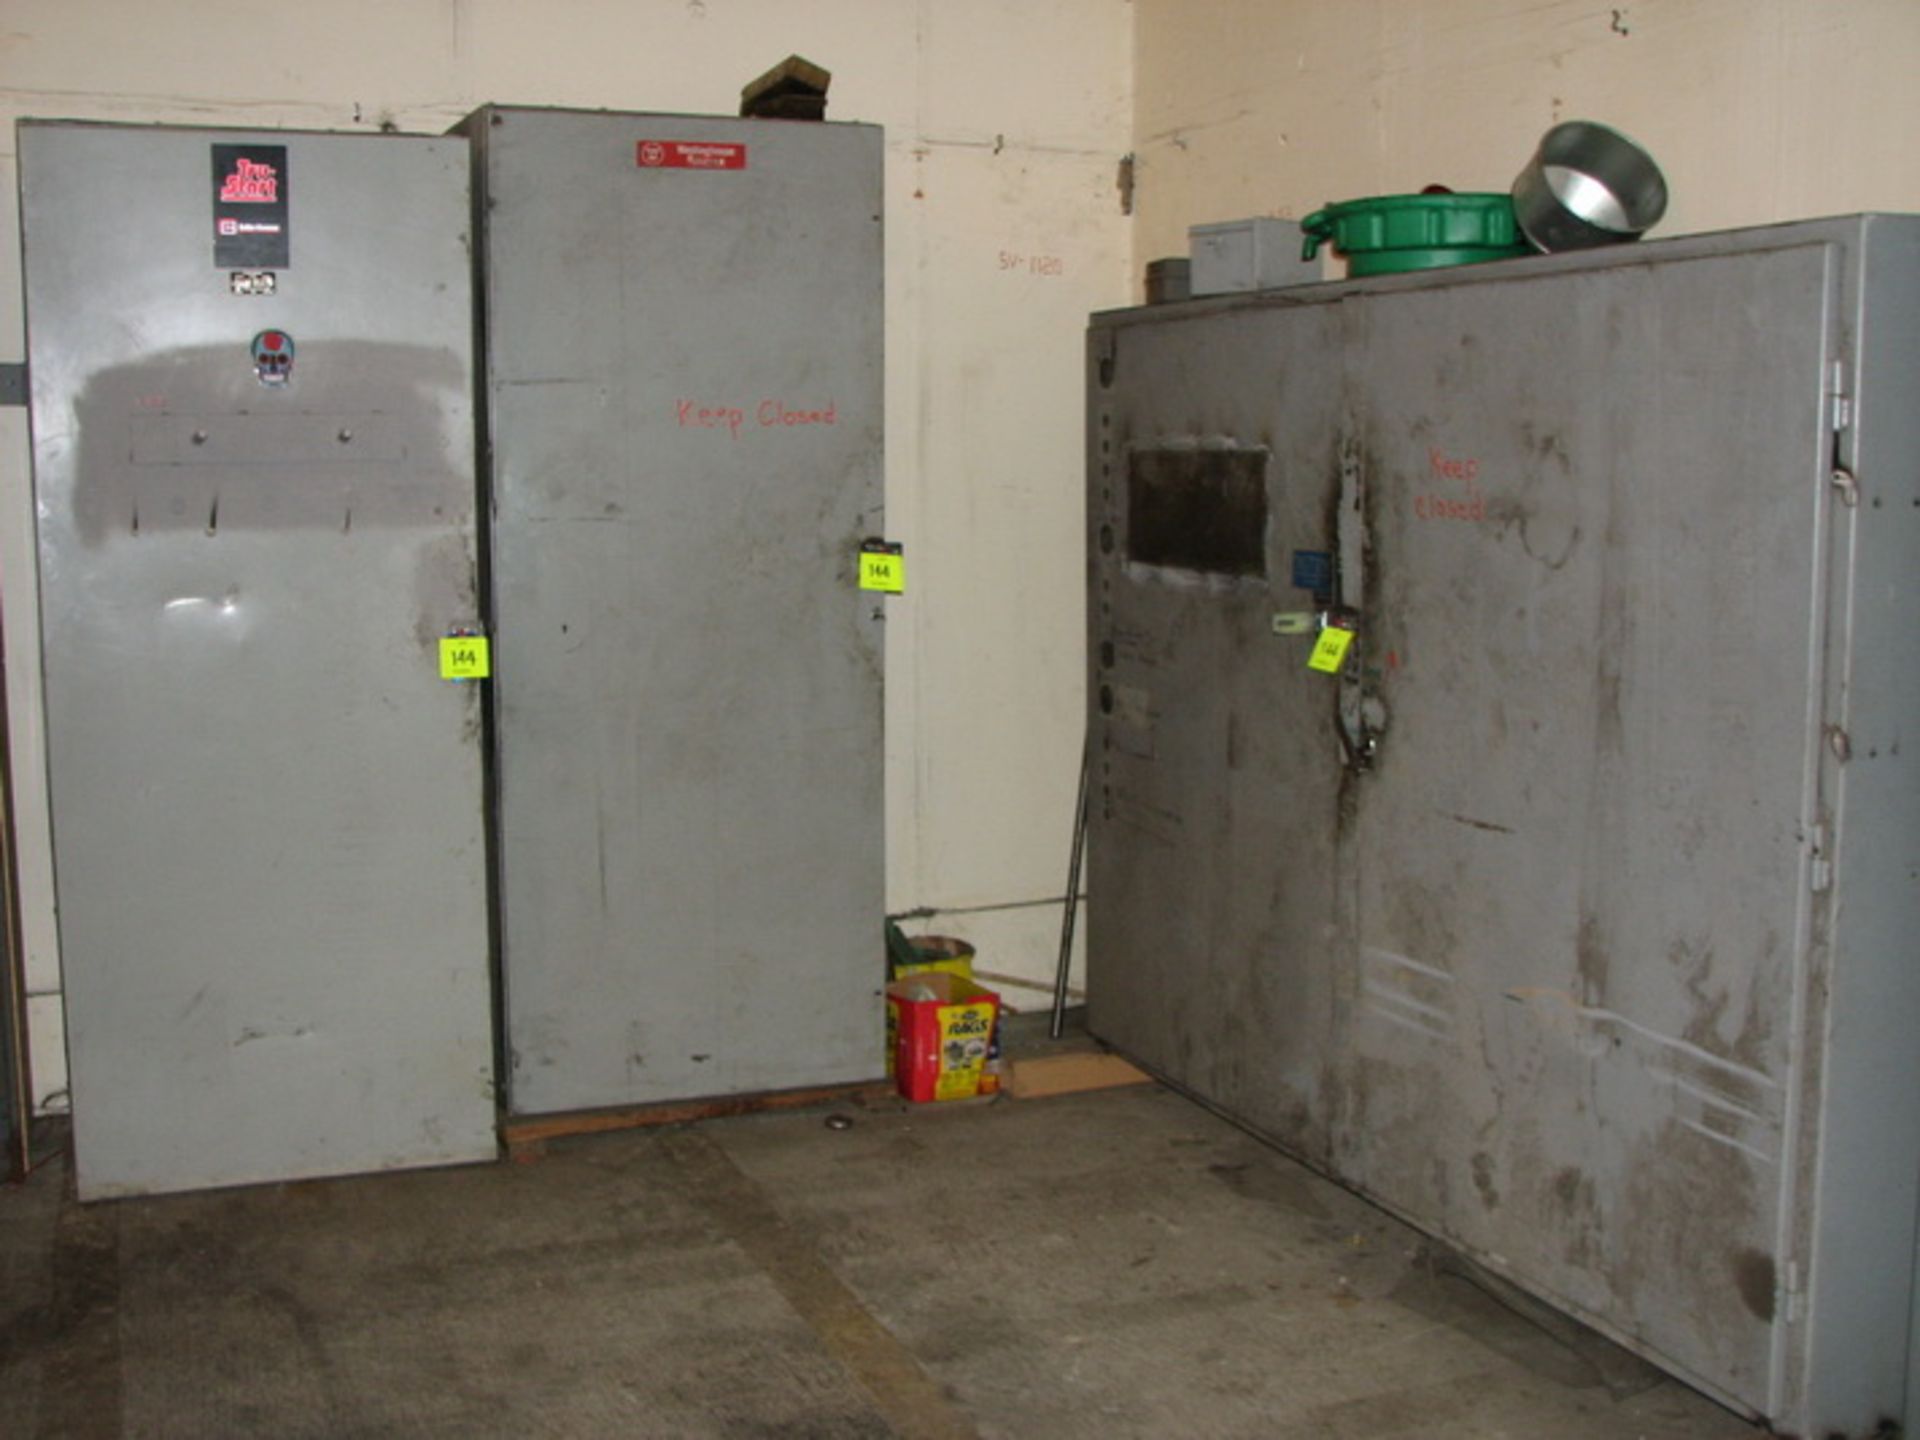 [Lot] (5) Storage cabinets with miscellaneous parts, electrical sprockets, motor, shims - Image 3 of 4